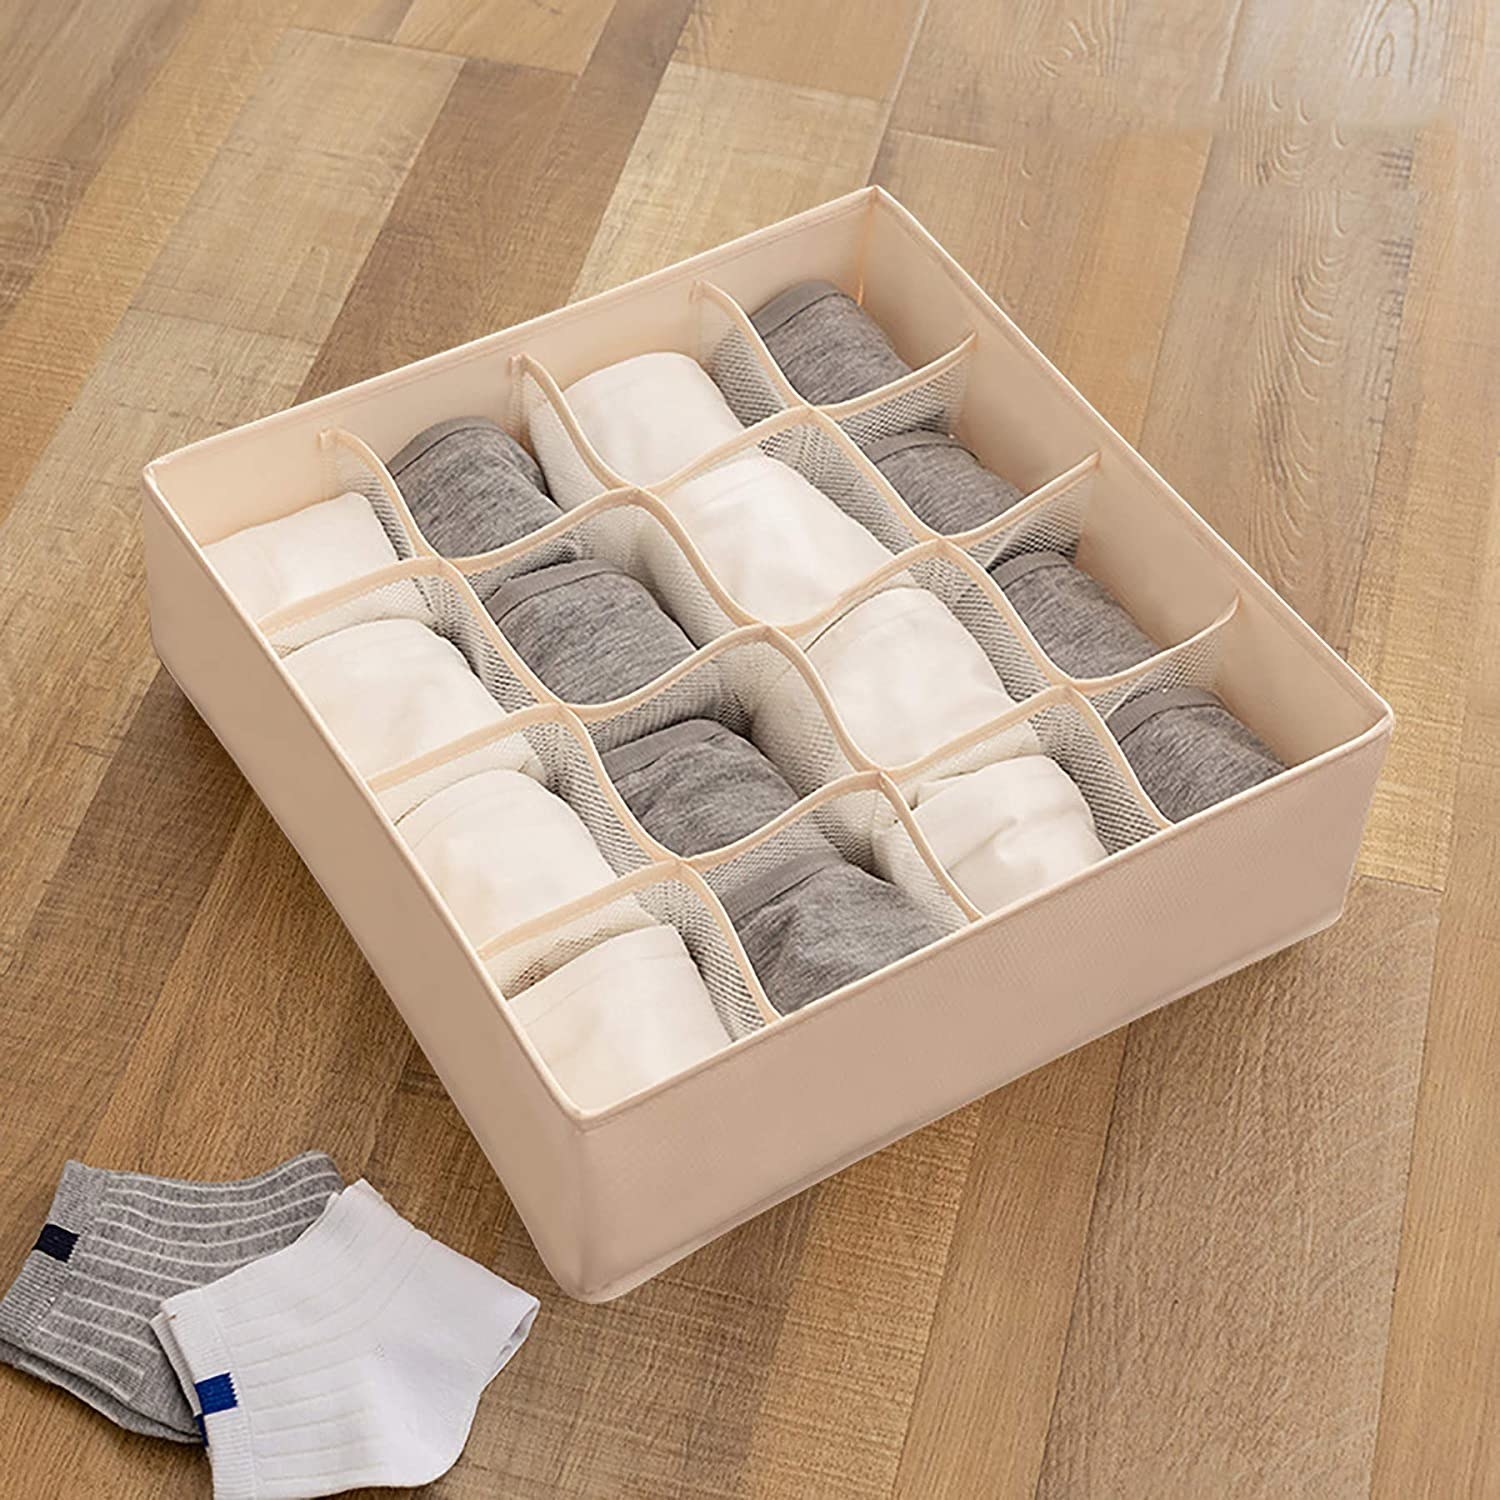 The sock organizer filled with neatly folded pairs of socks